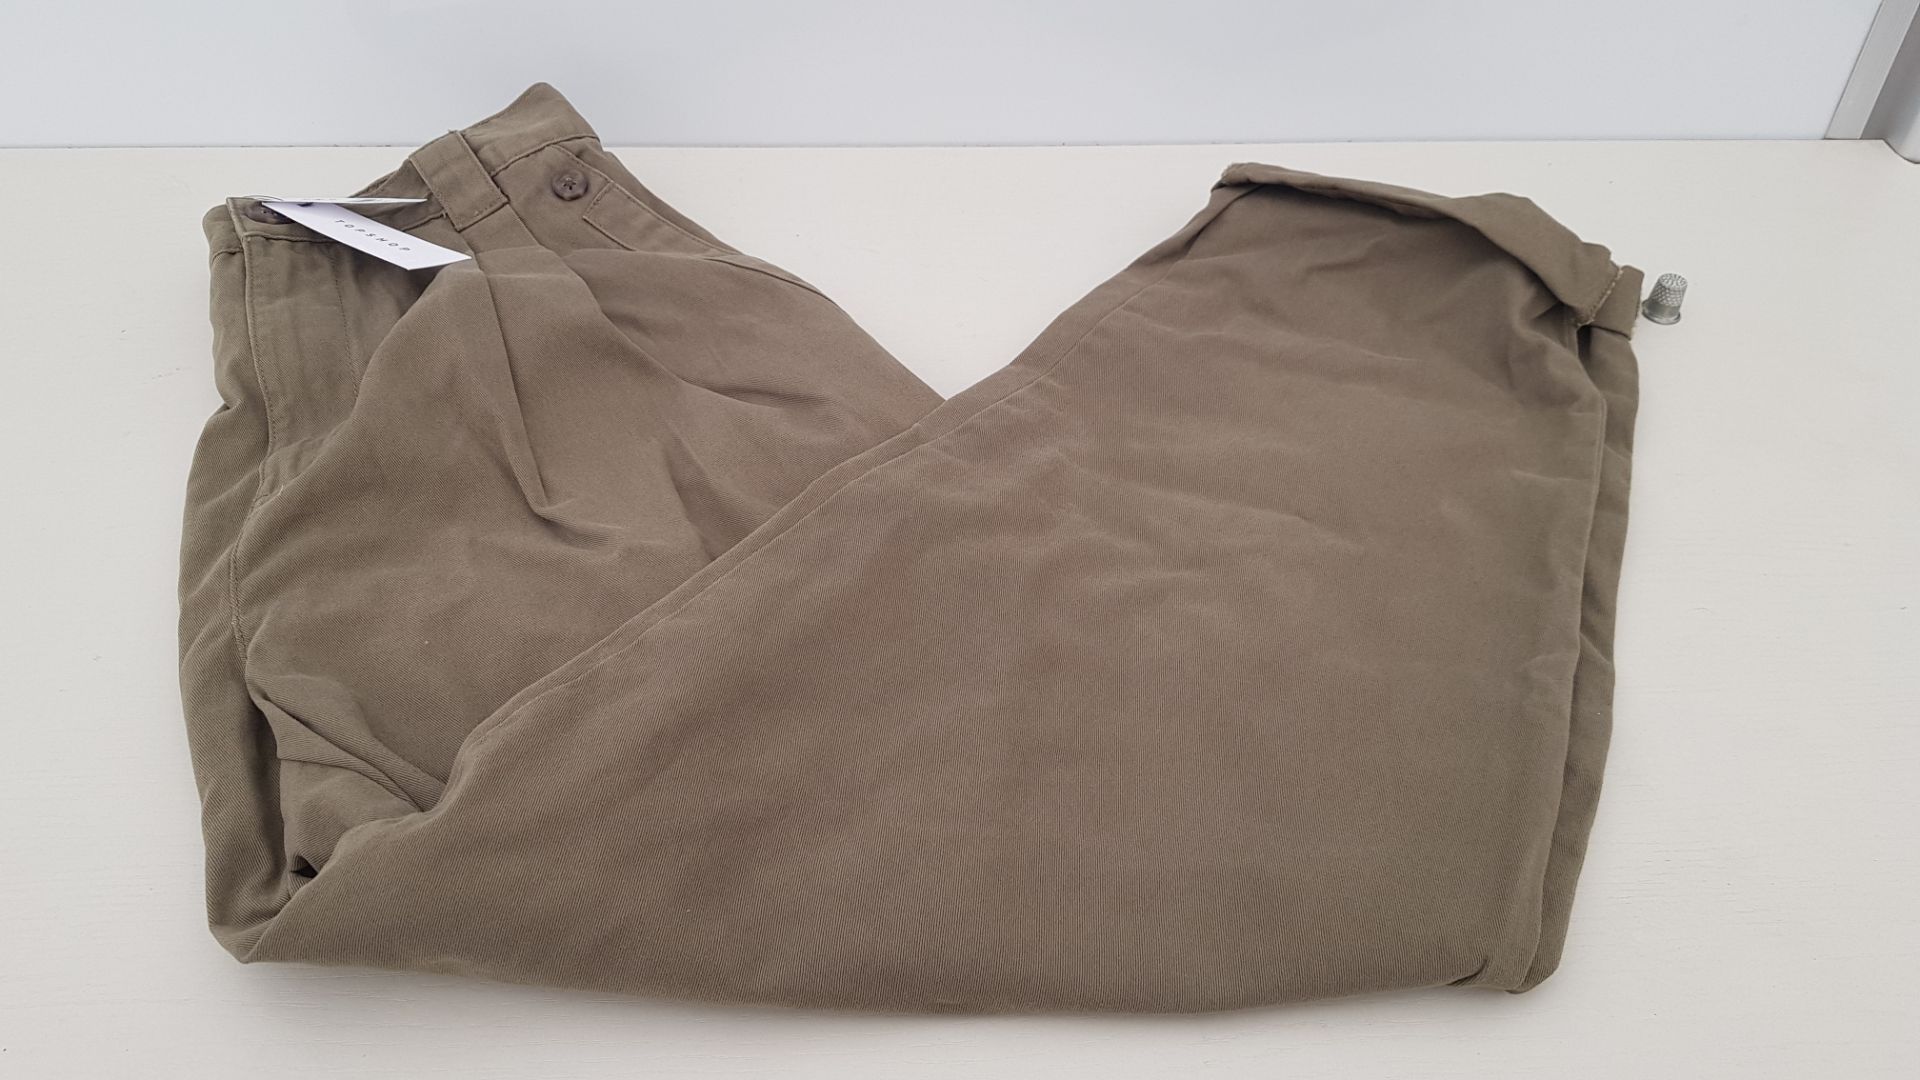 20 X BRAND NEW TOPSHOP KHAKI PANTS UK SIZE 8 AND 10 RRP £36.00 (TOTAL RRP £720.00)